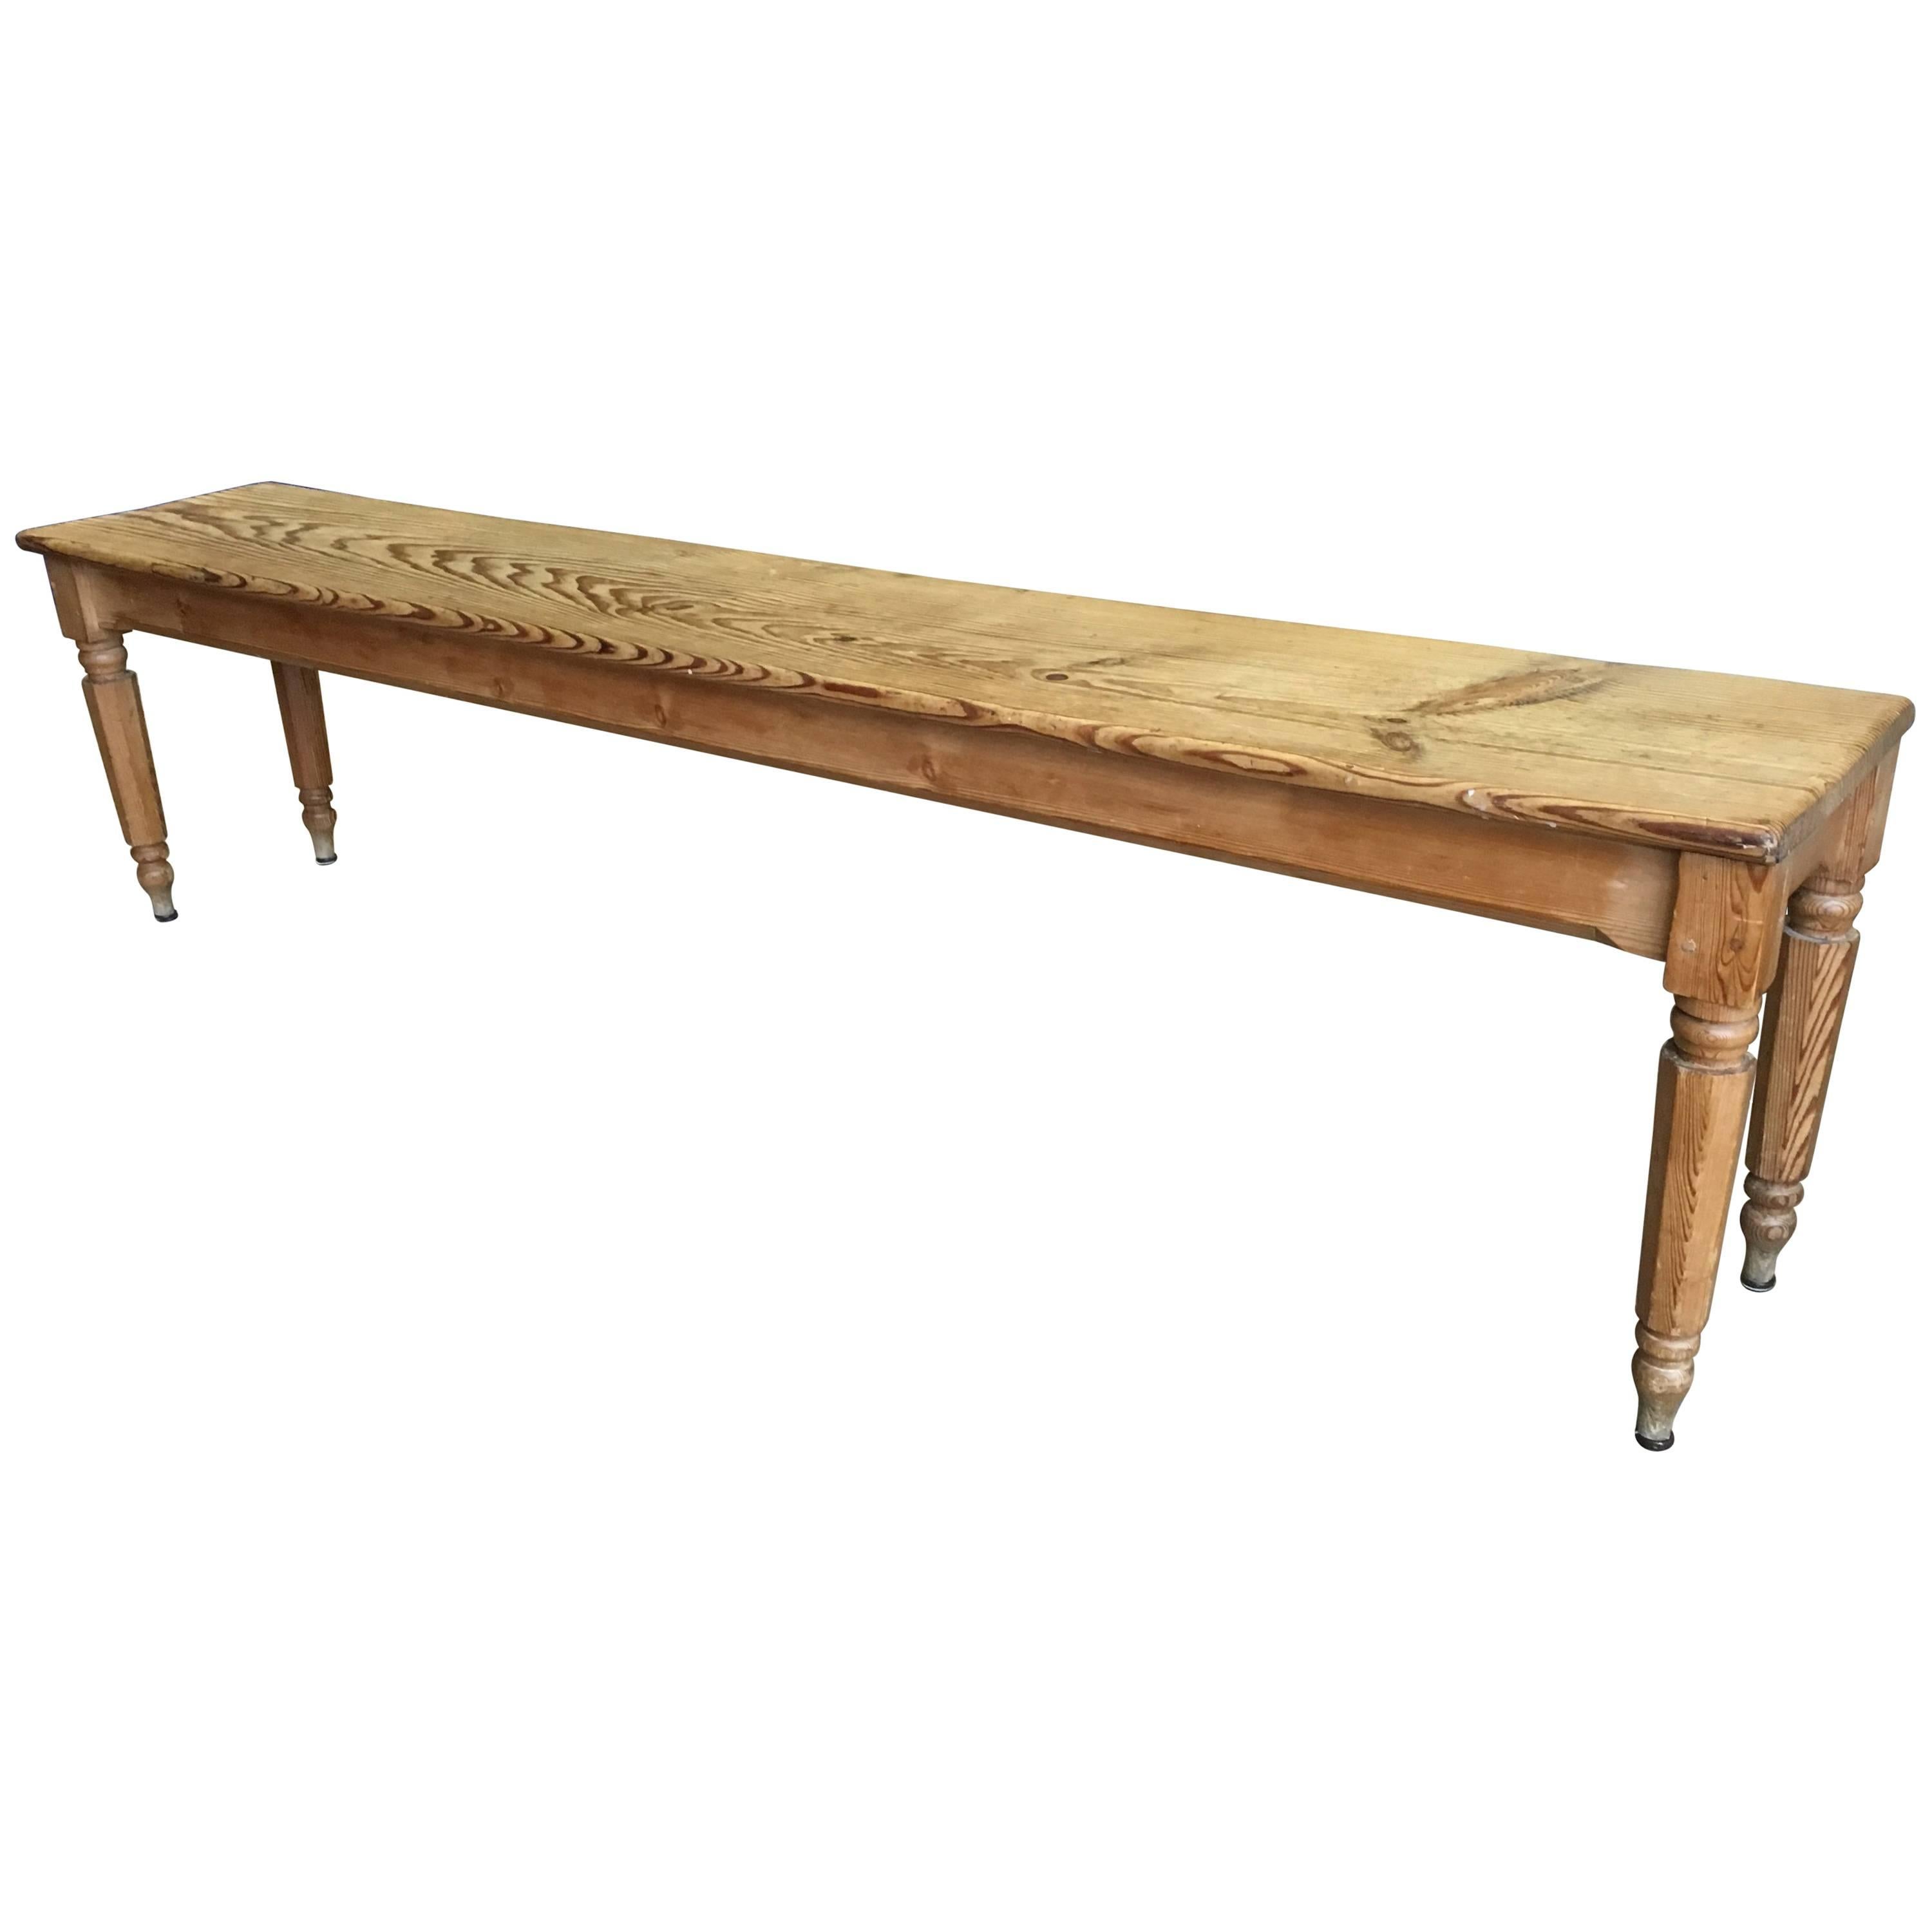 French Country Pine Bench, 19th Century